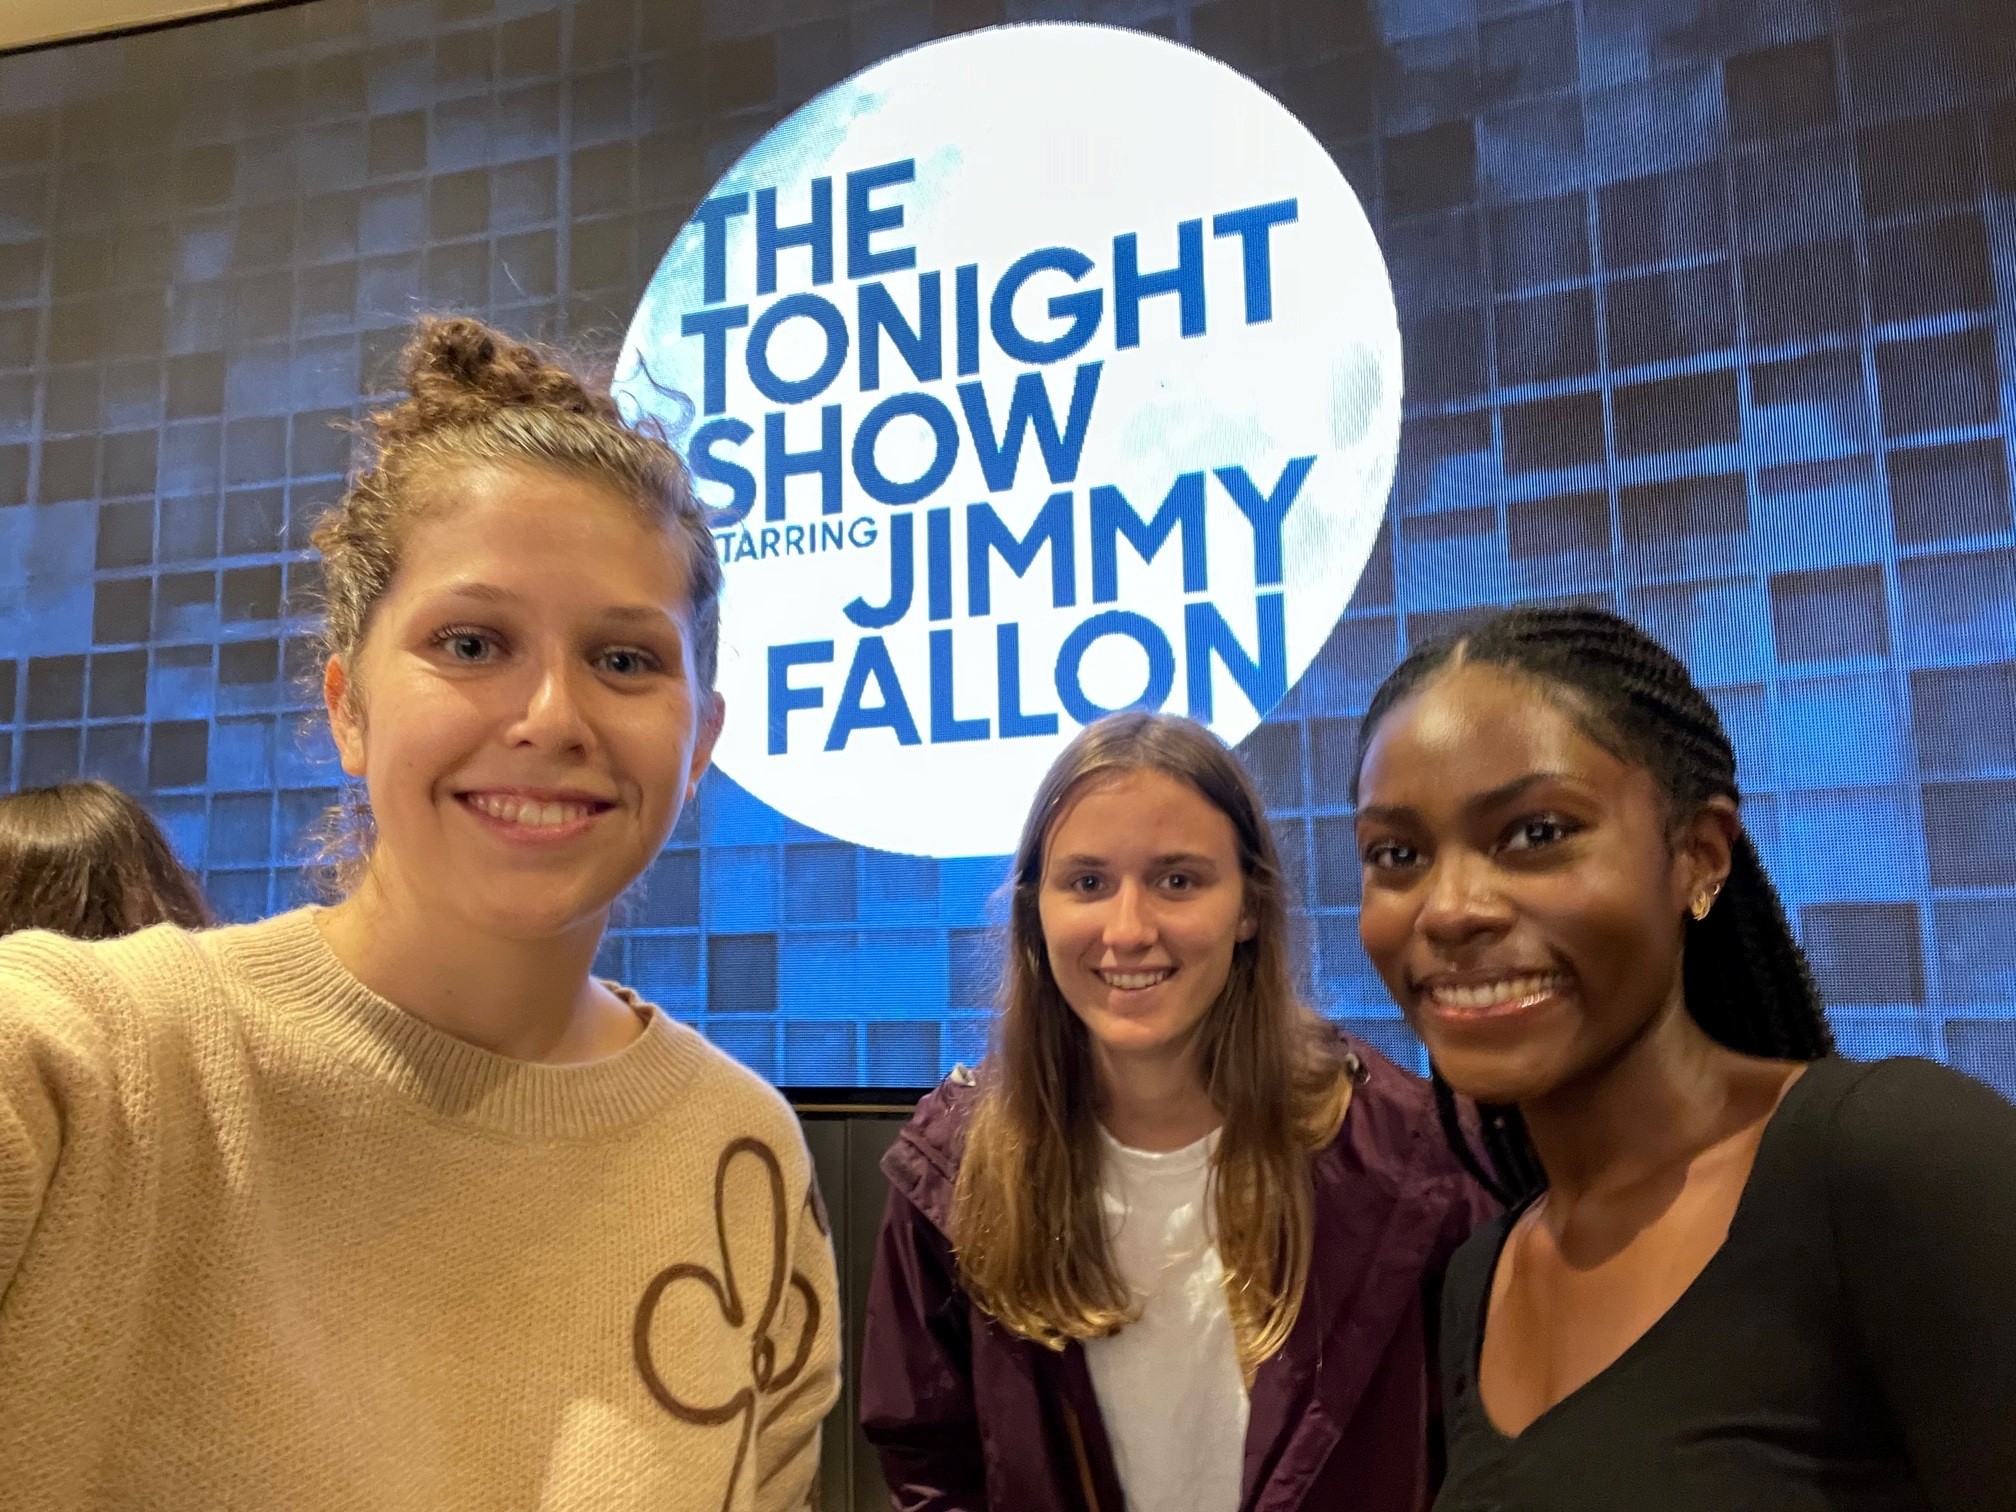 Belmont East students pose for picture in front of the Tonight Show logo